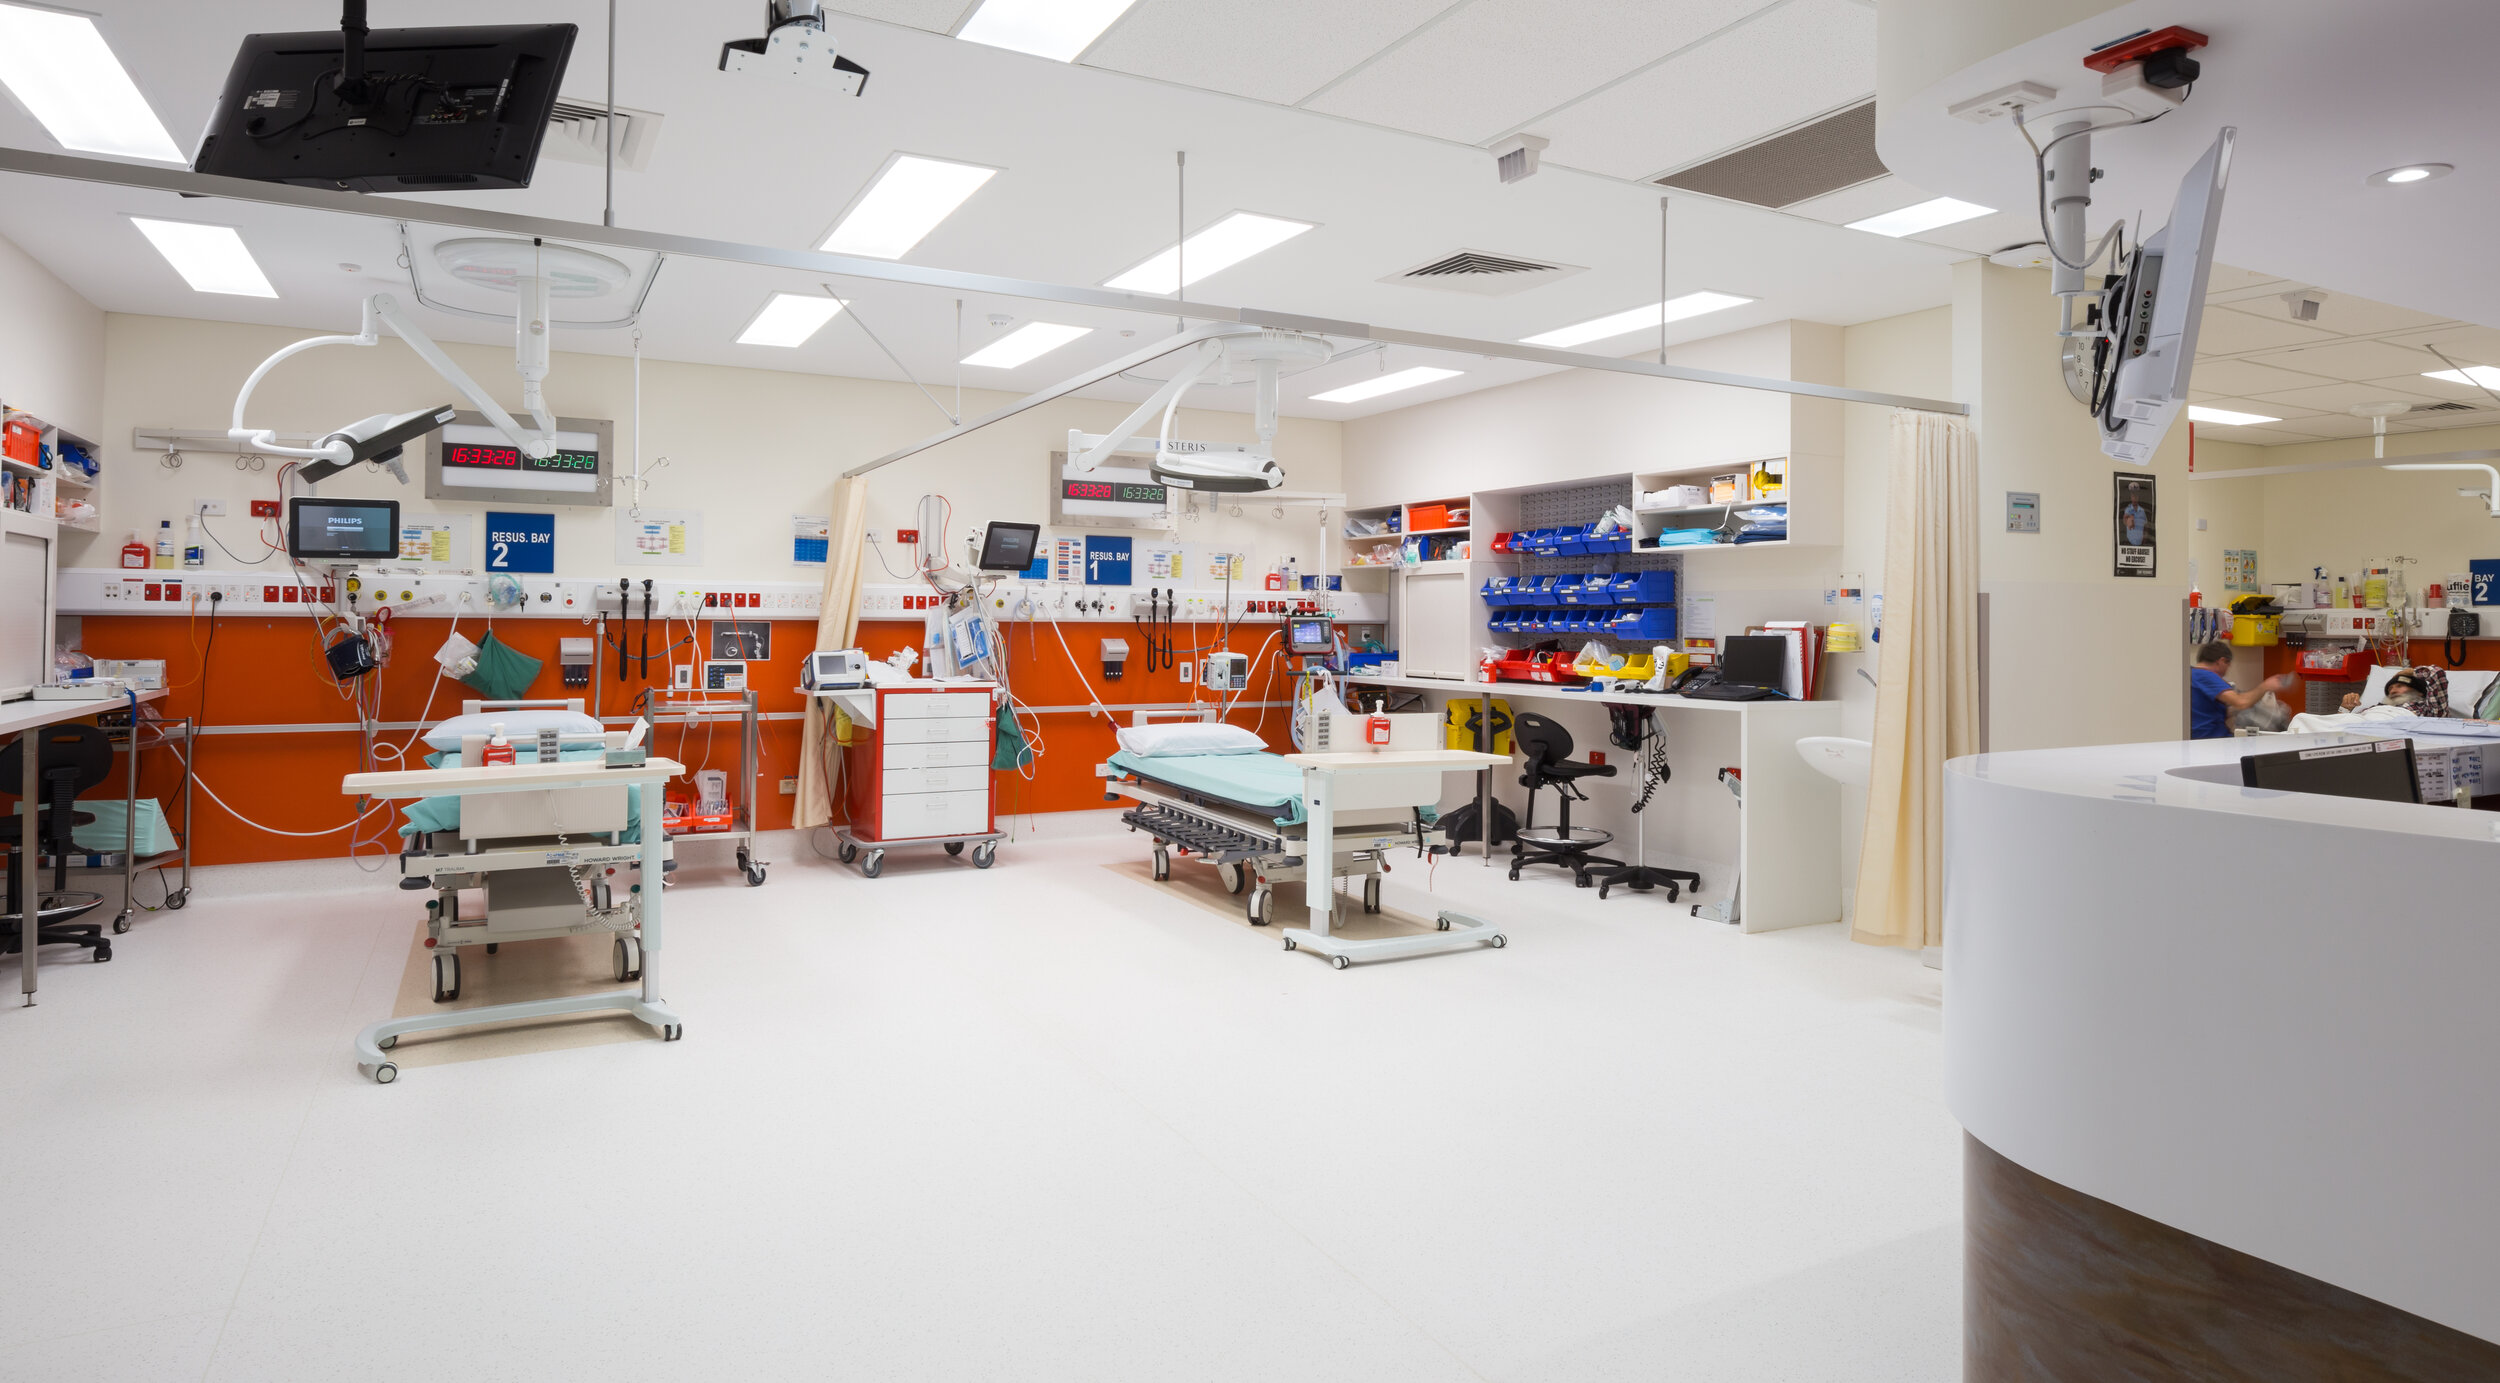 16 view in emergency to resus bays and staff station 01.jpg